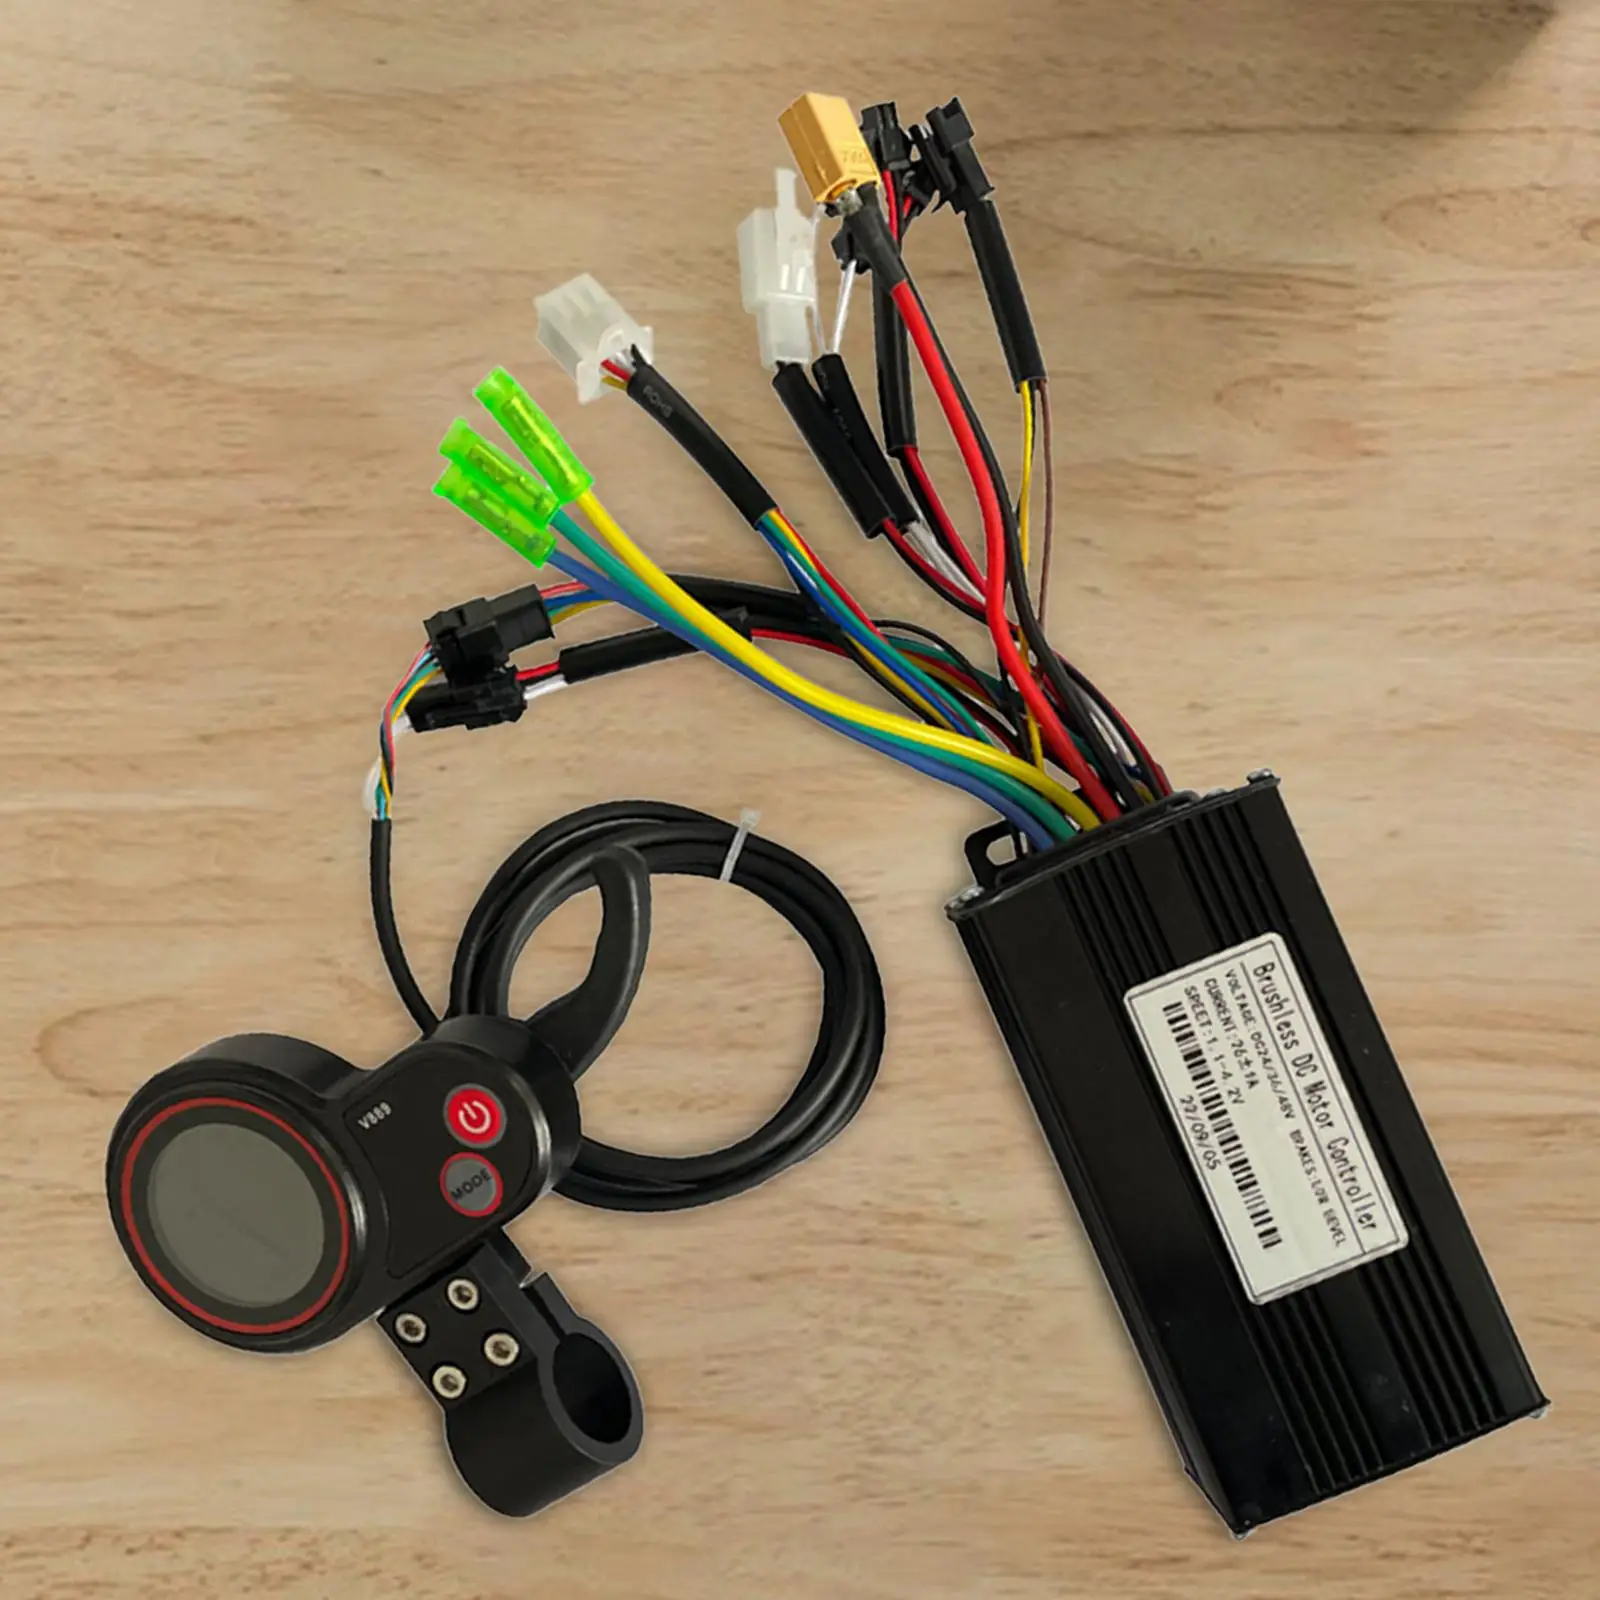 Speed Motor Controller Brushless Controller Easy to Install E bikes electric Scooters Controller for 500/750W Motor Controller